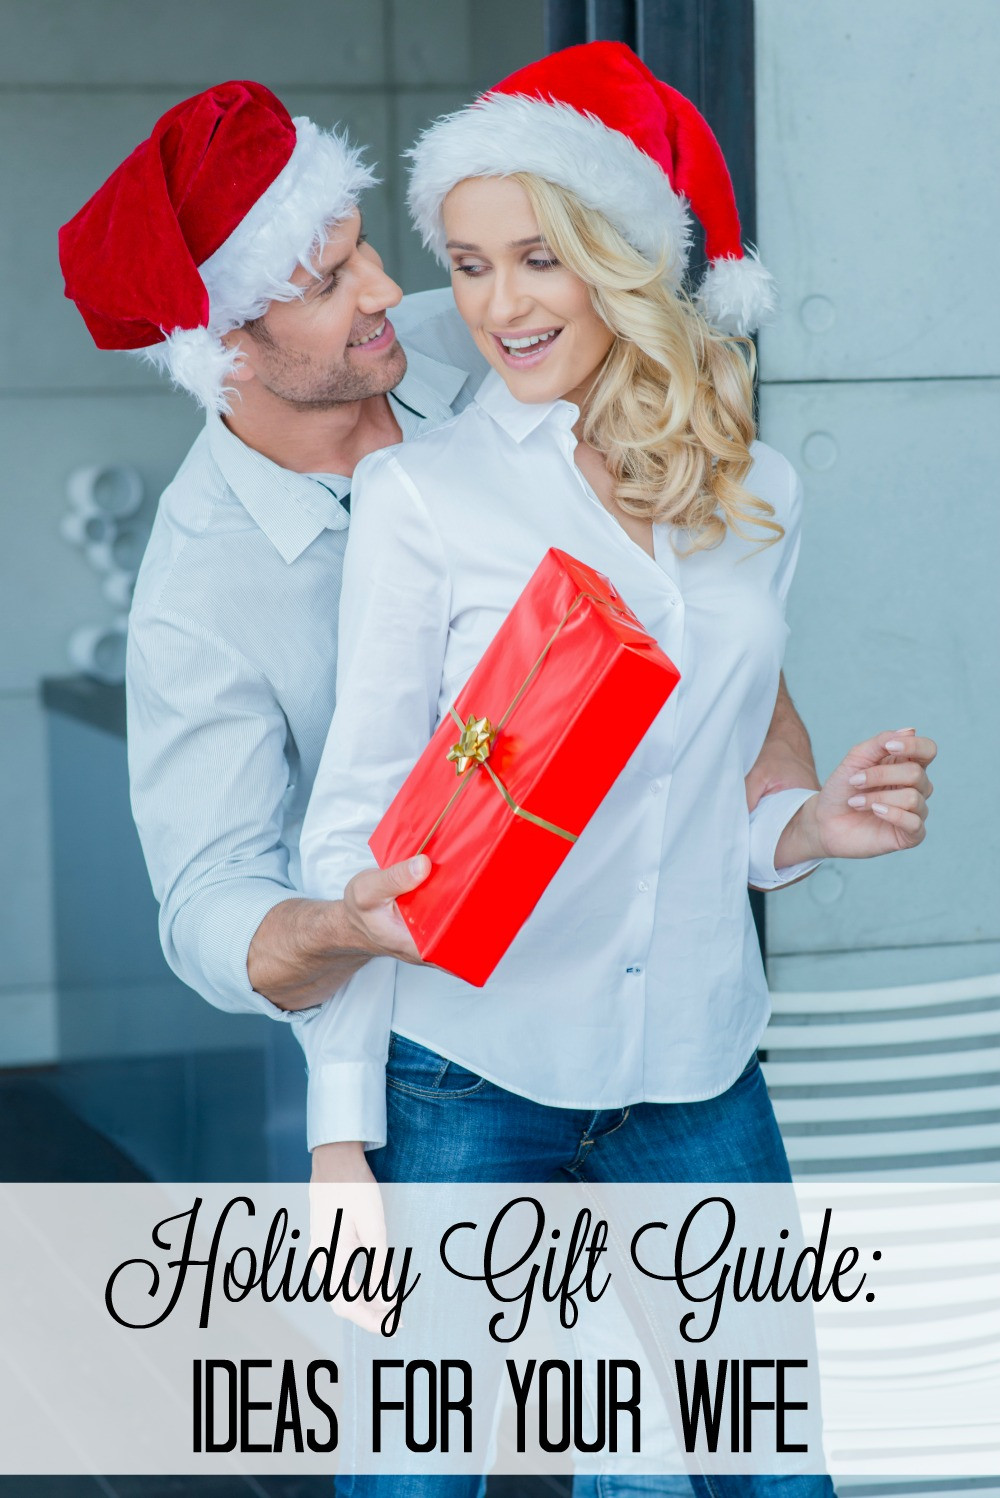 Christmas Gift Ideas For Wife
 Holiday Gift Guide Ideas for the Wife